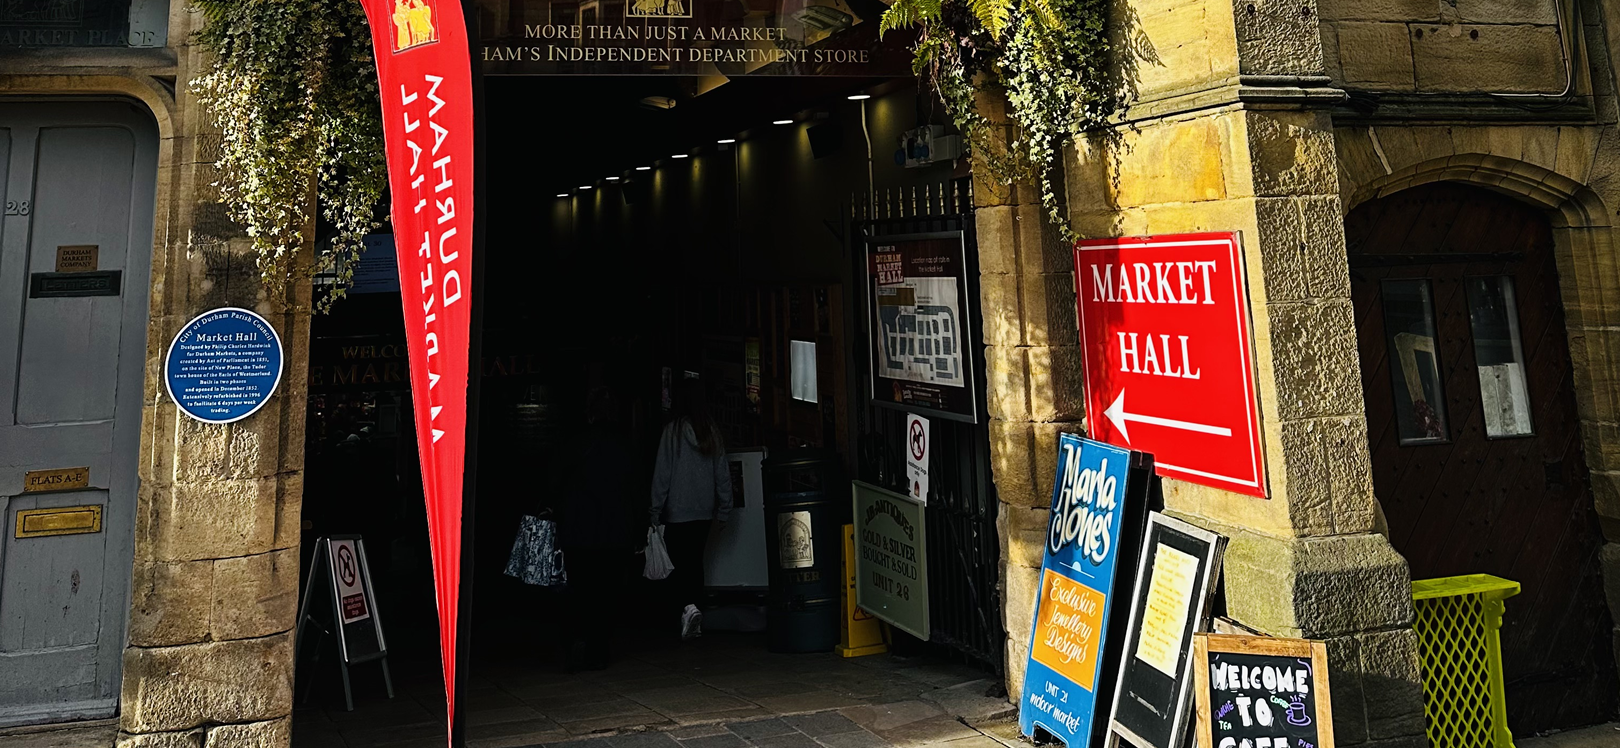 The entrance to Durham Markets